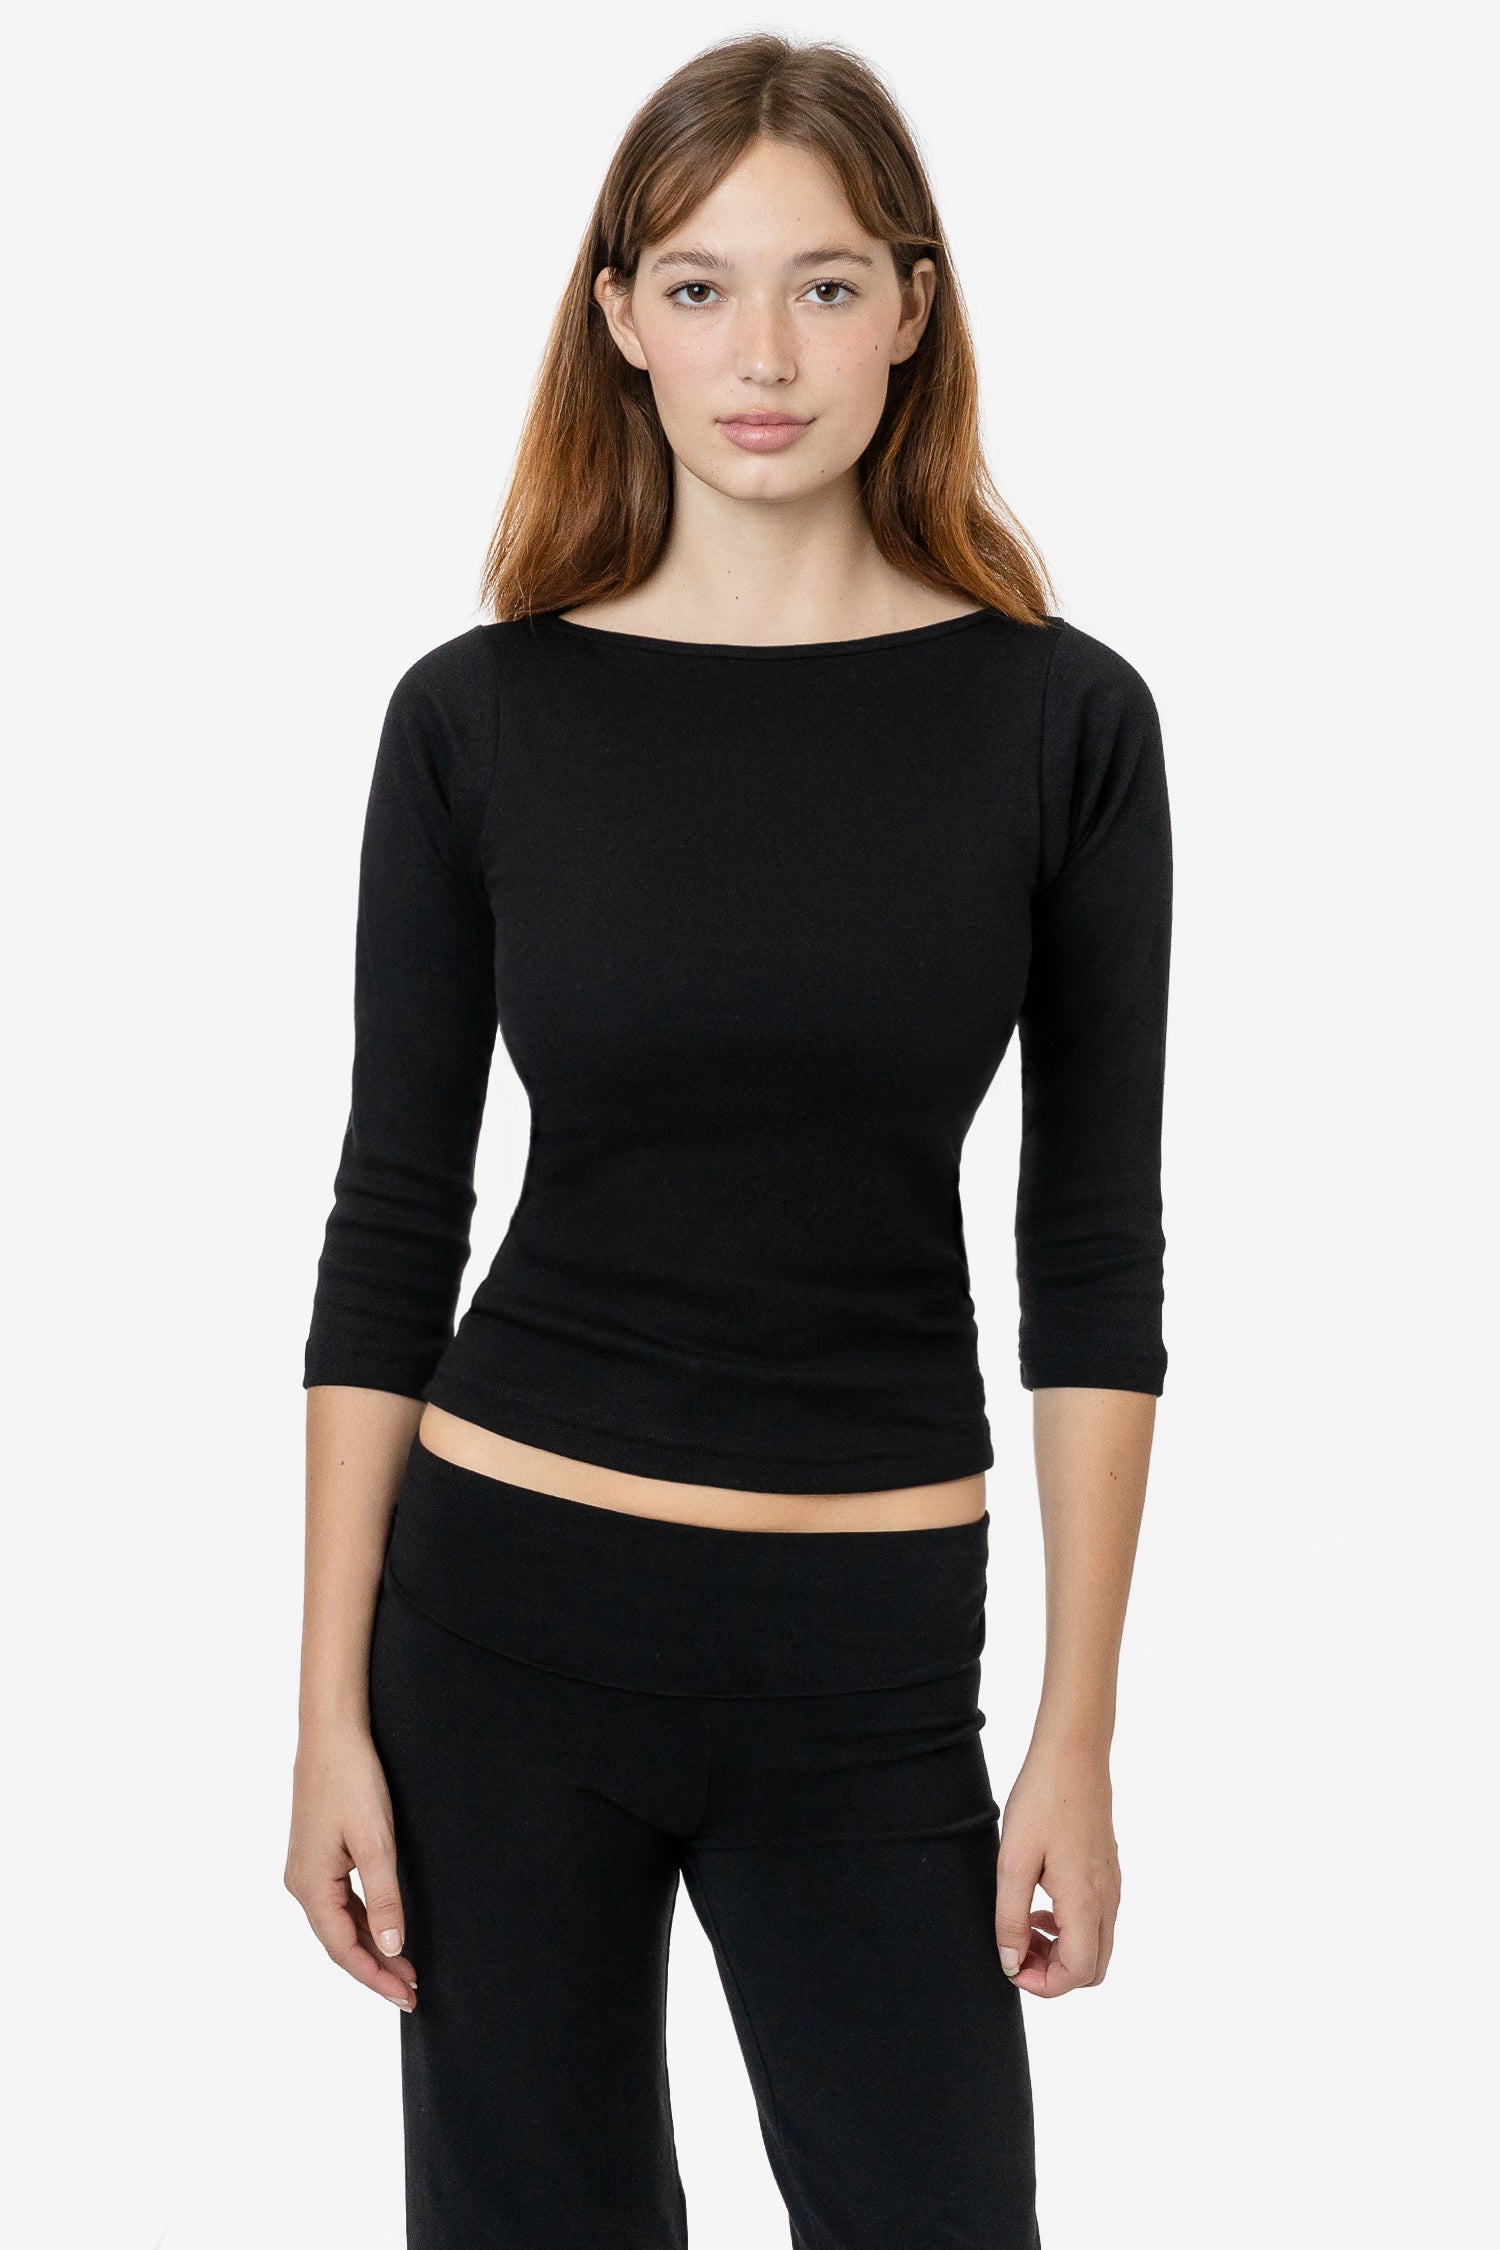 Black Mesh Boat Neck Top With Long Sleeves by Flash Lingerie